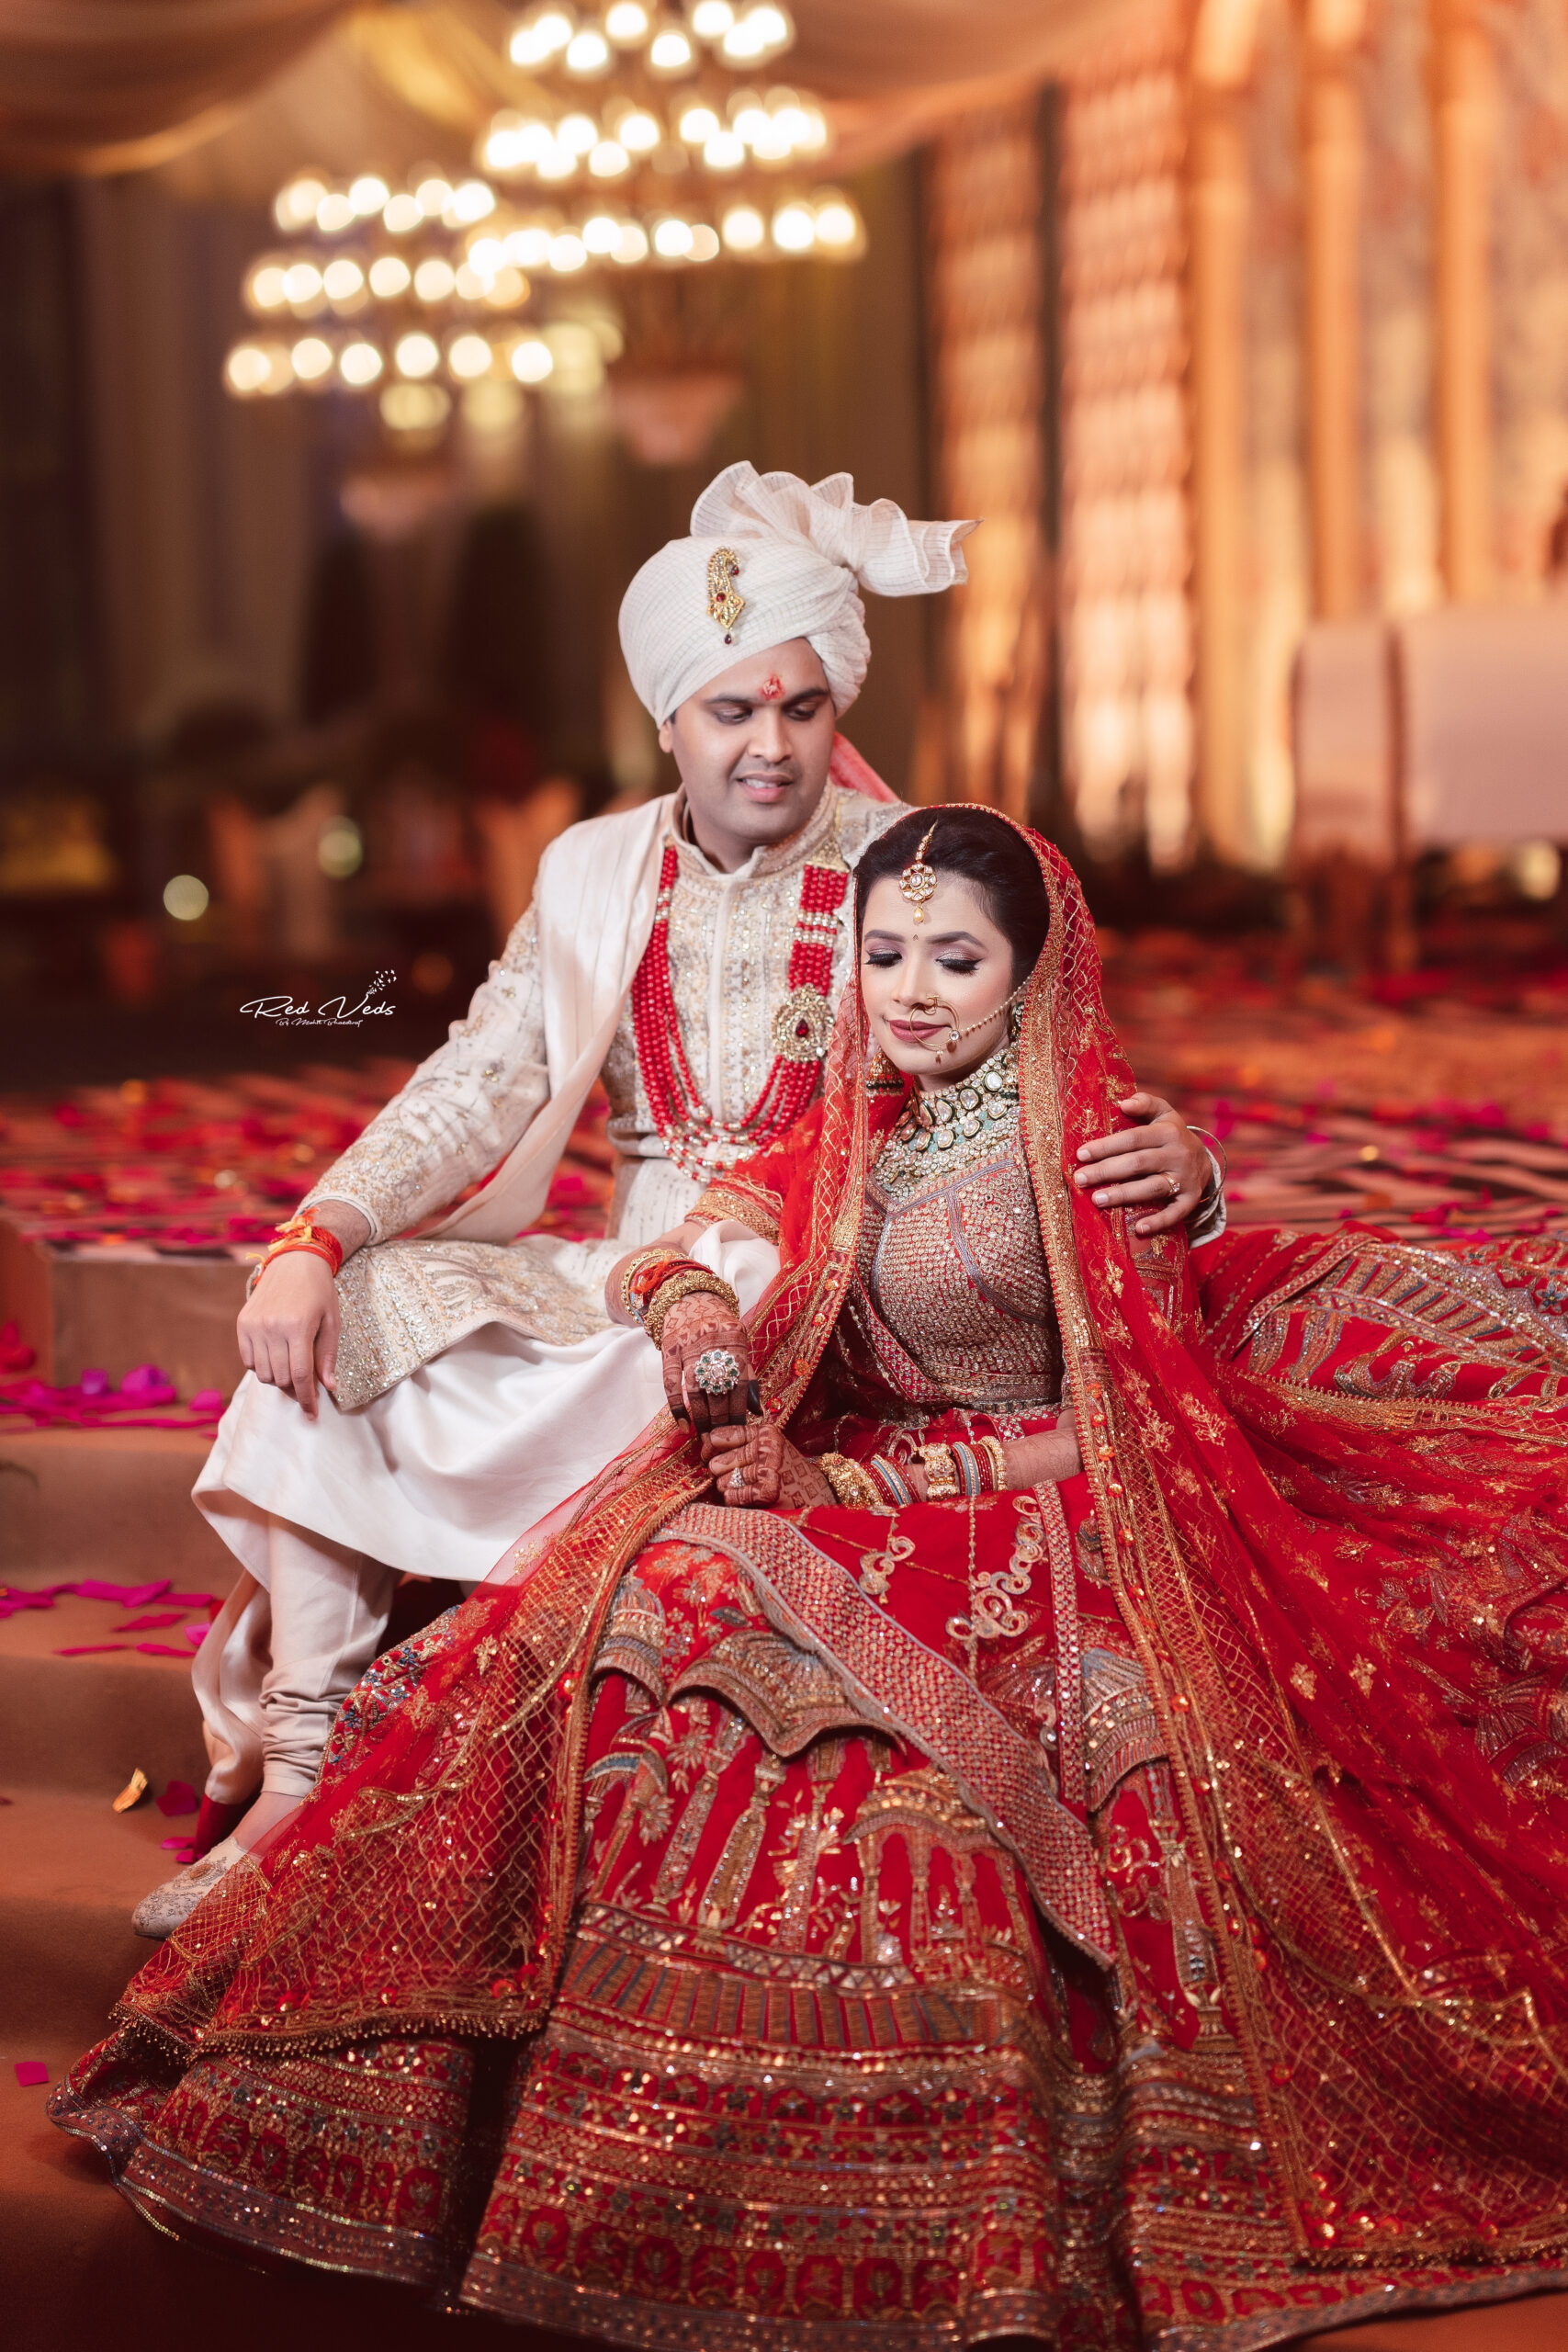 7 Best Poses For Wedding Pictures For Your Bride and Groom 2023